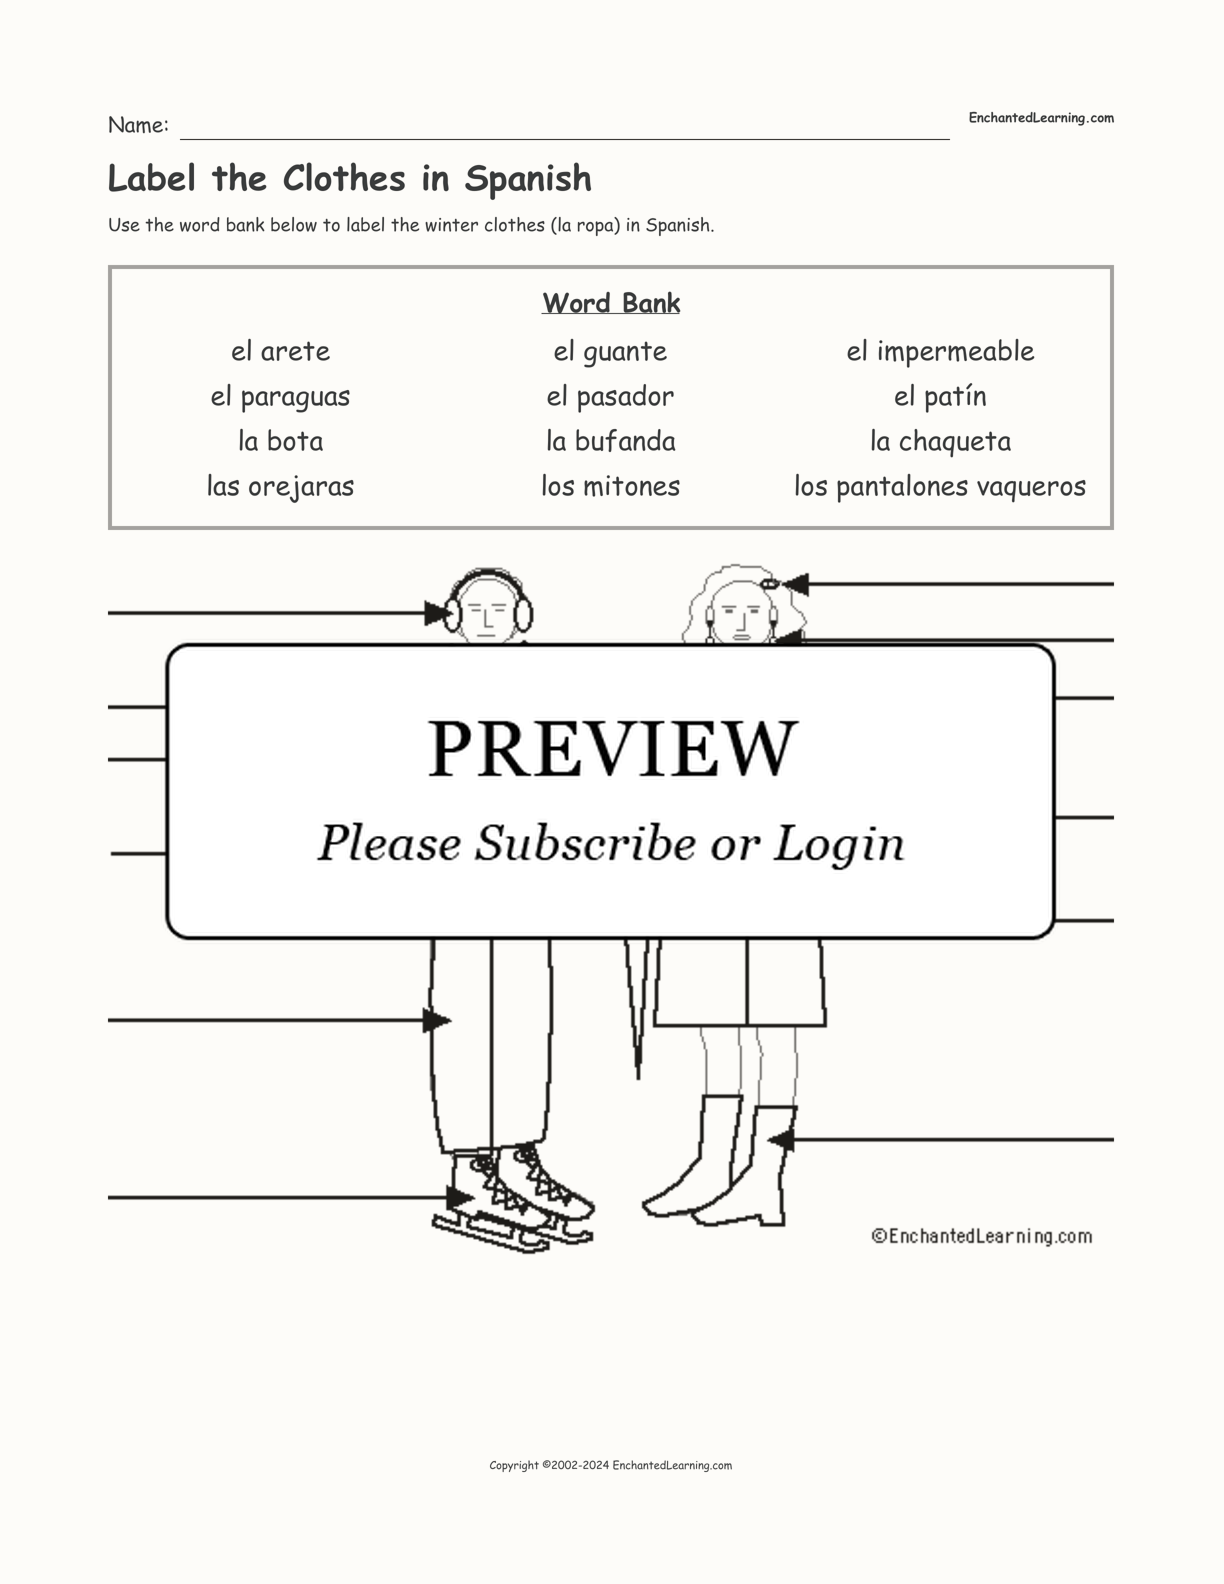 Label the Clothes in Spanish interactive worksheet page 1